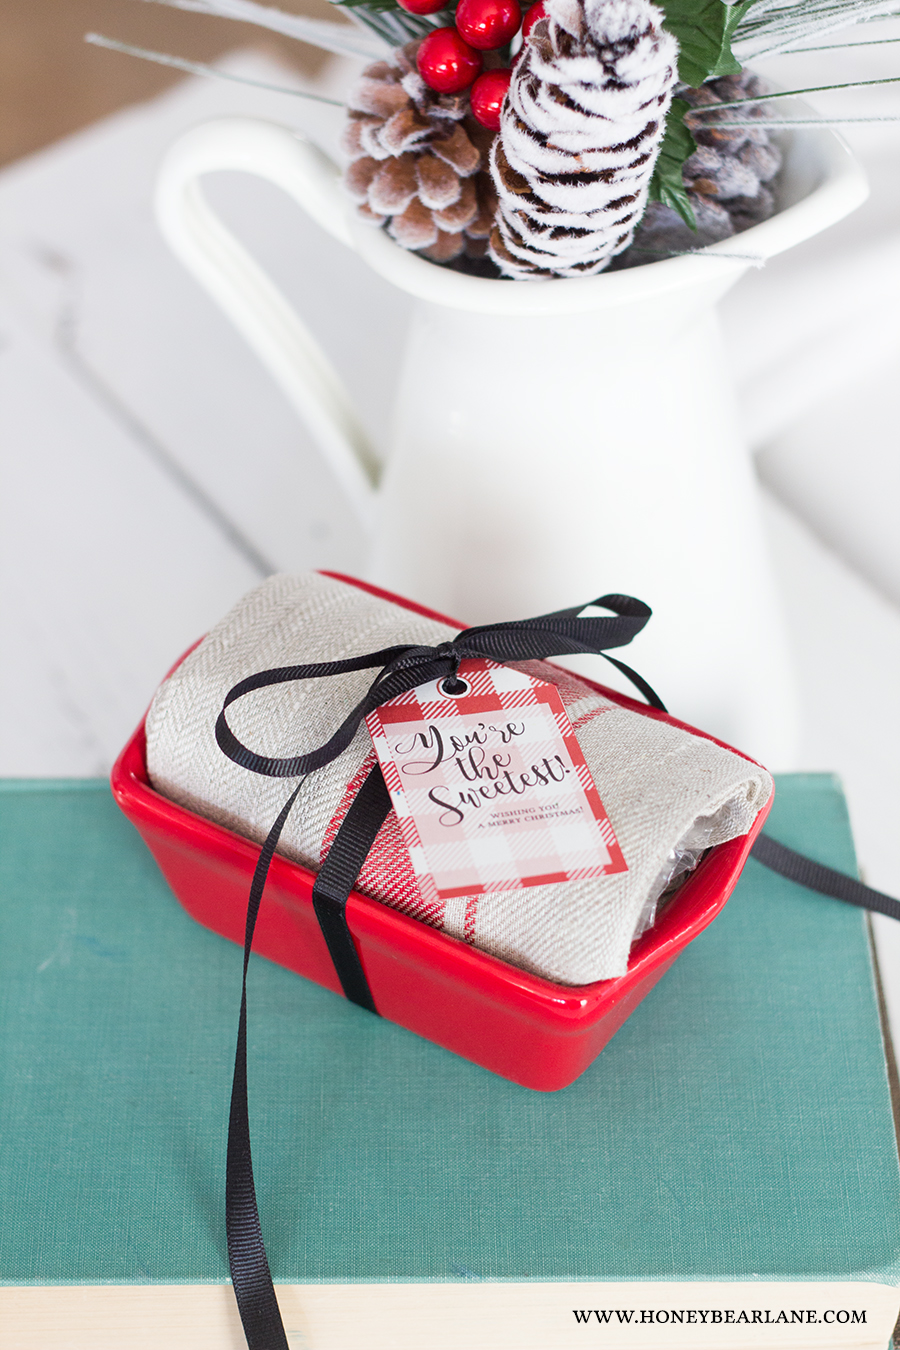 Easy Neighbor Gifts under $5 with Free Festive Gift Tags - Design Dazzle